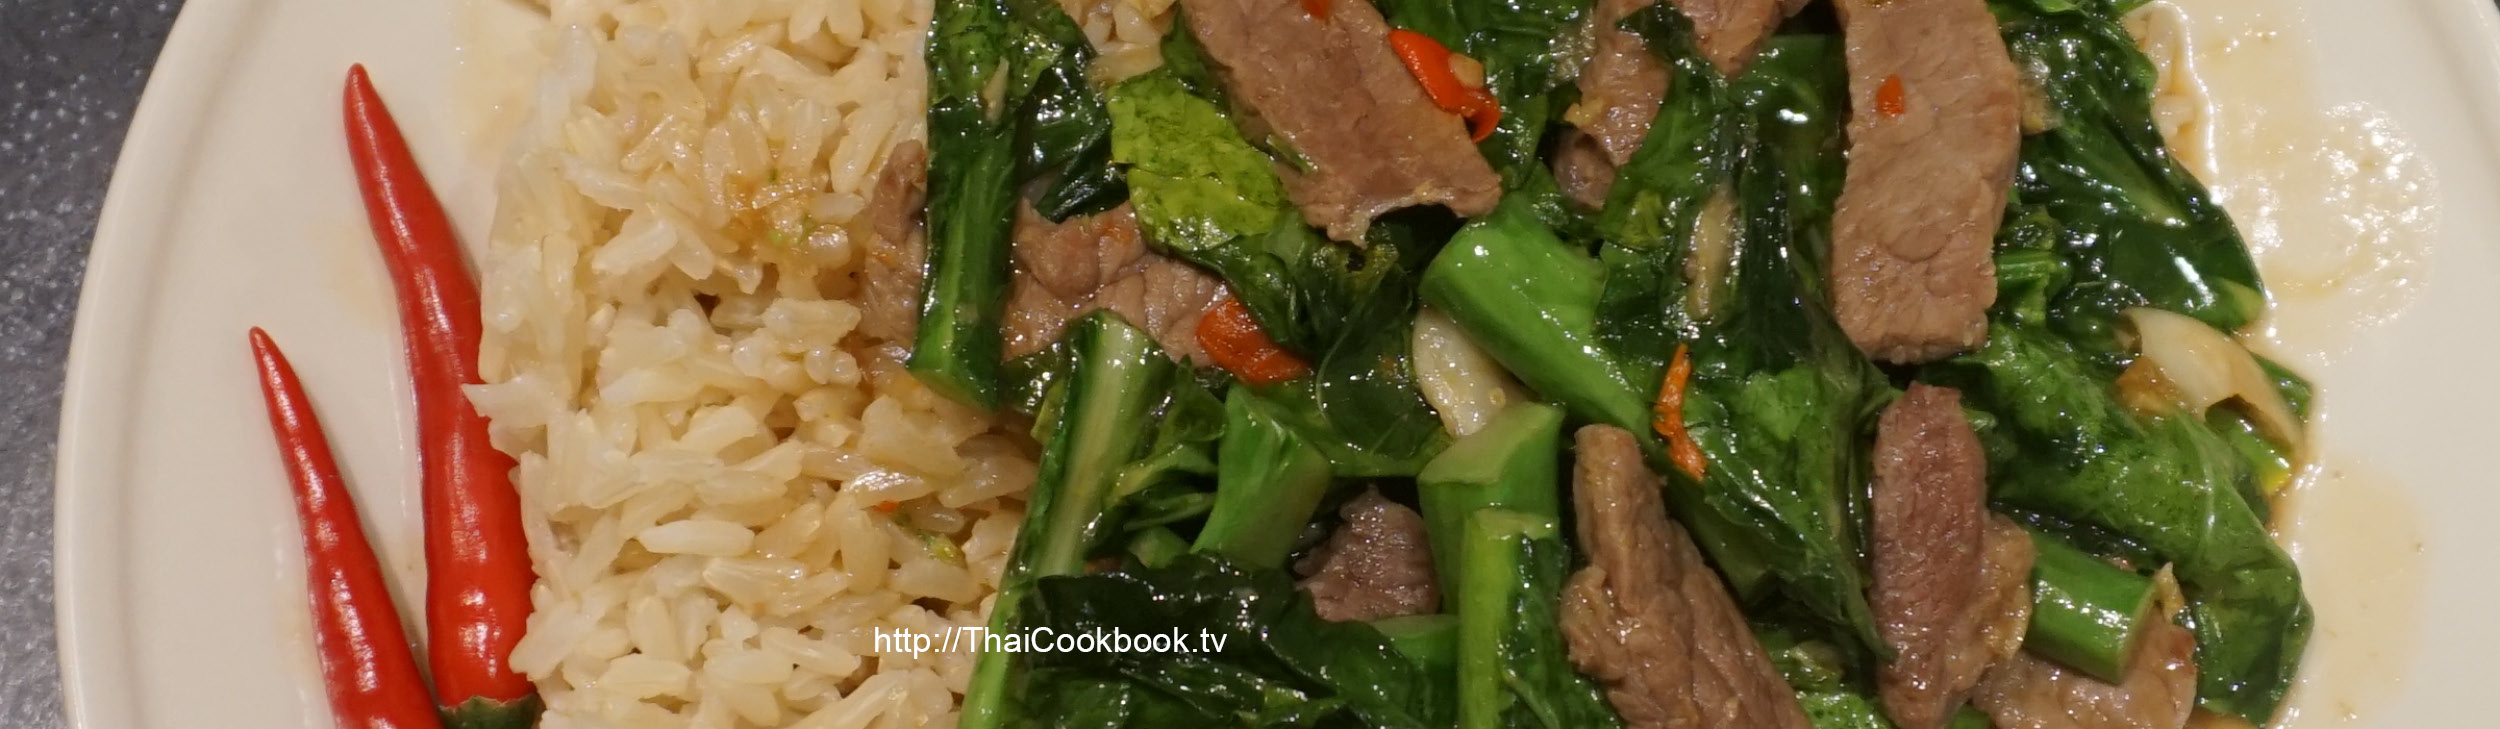 Authentic Thai recipe for Spicy Broccoli Beef